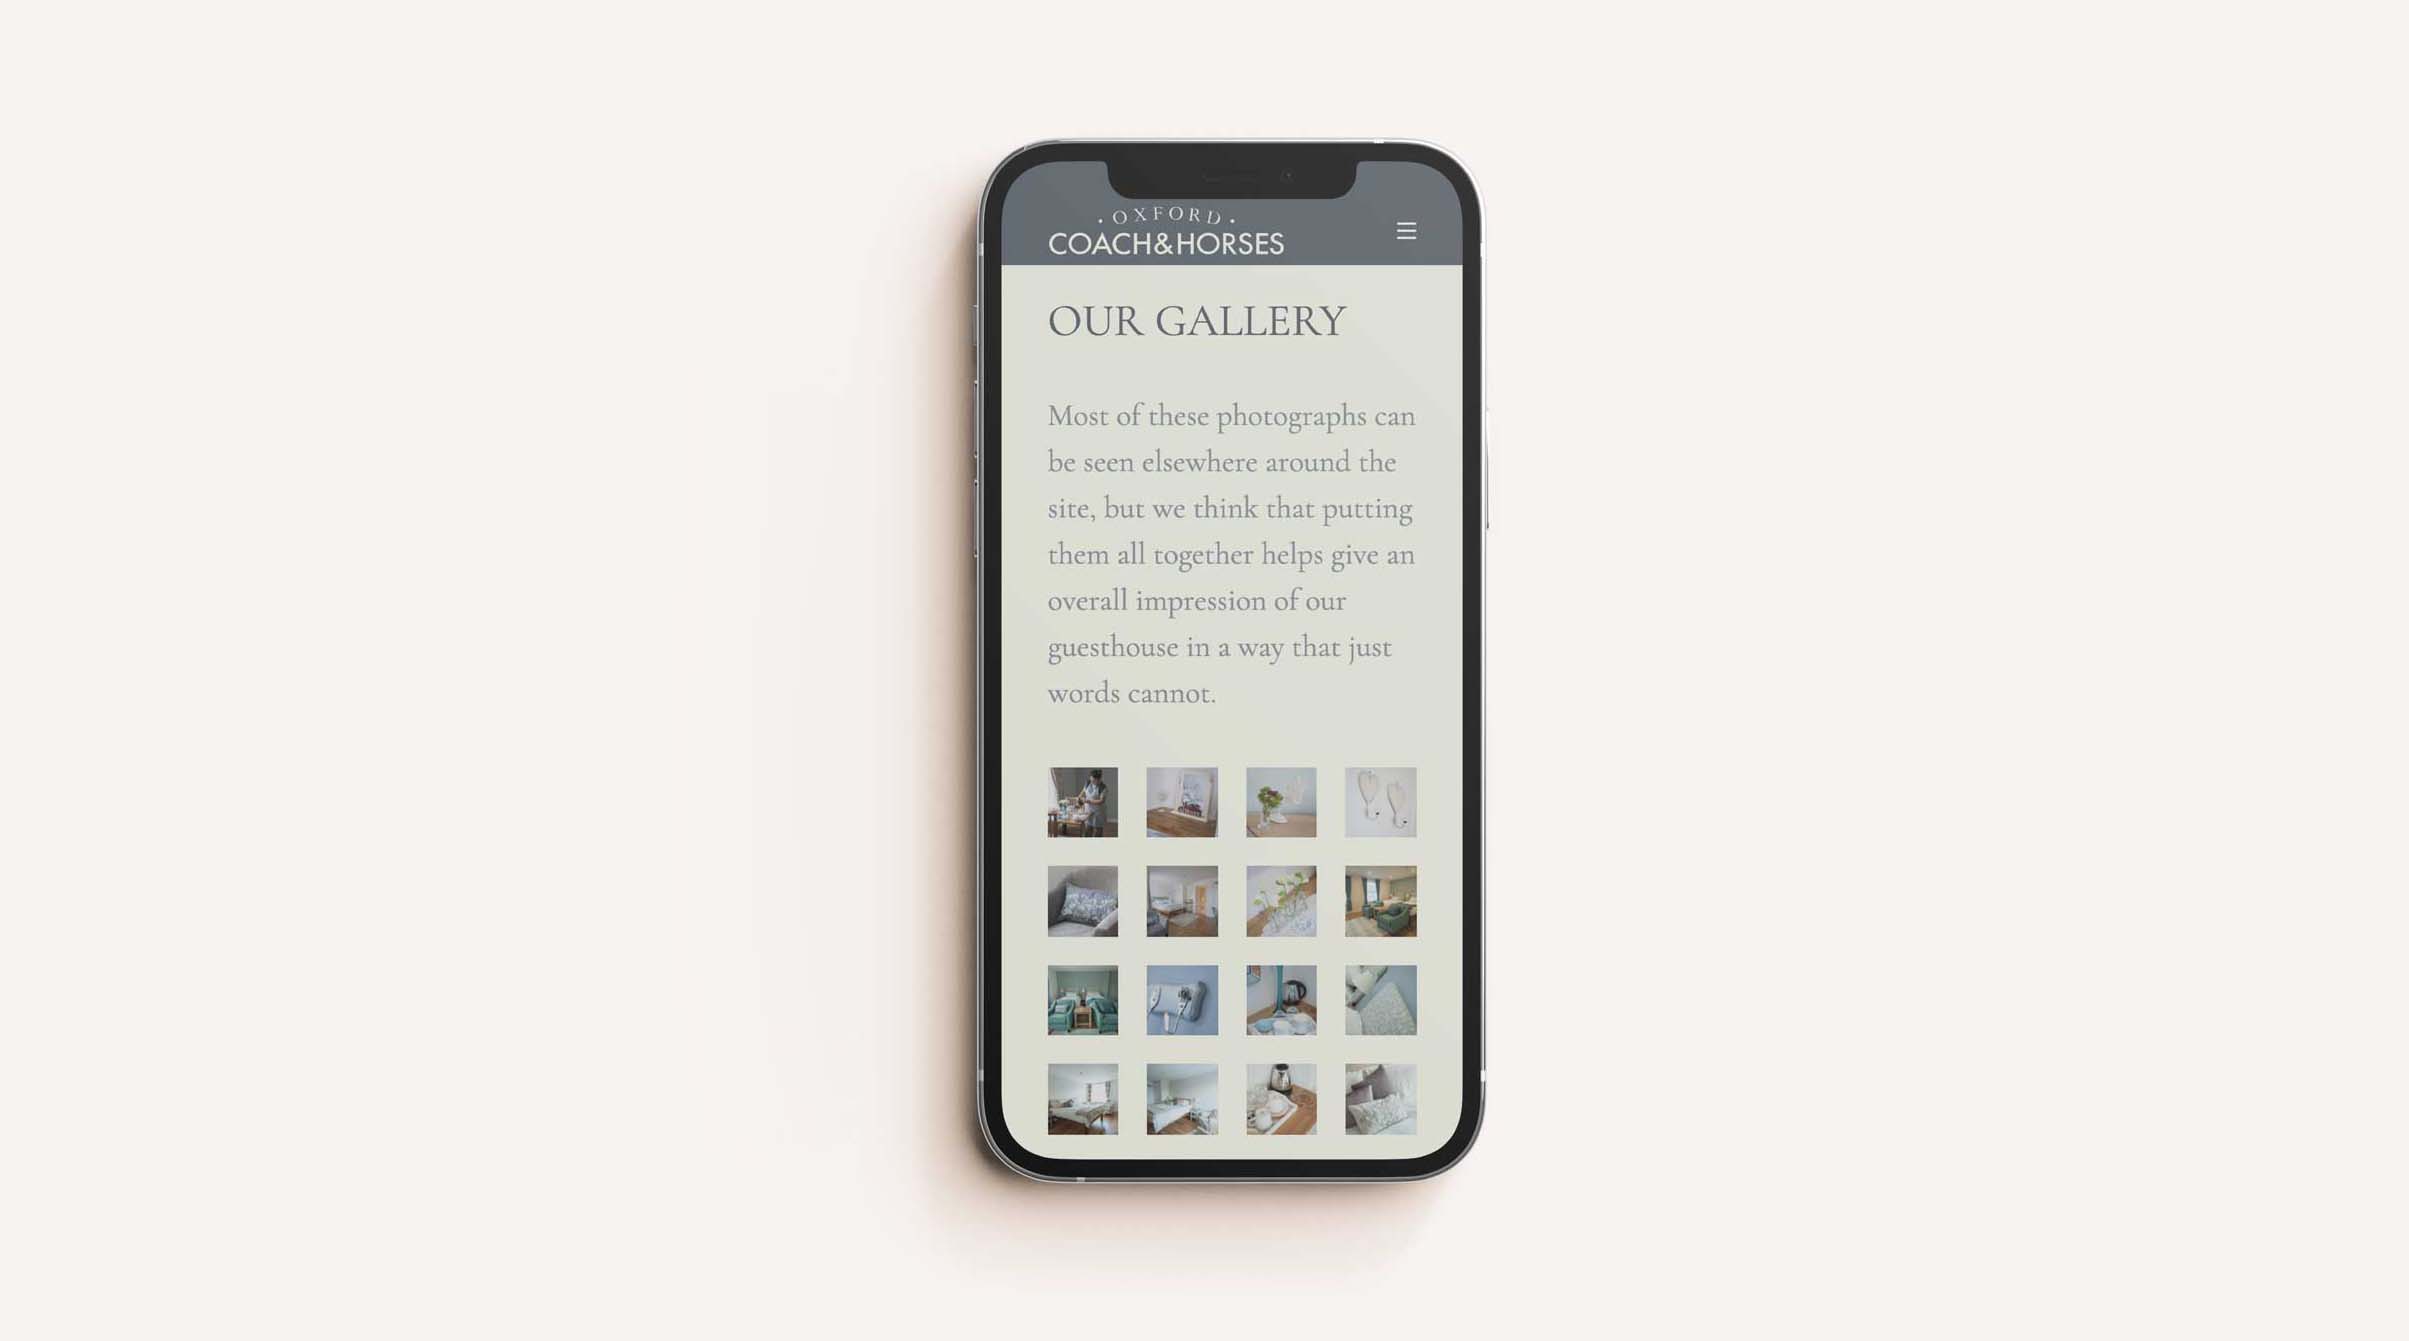 The coach & Horses Gallery page displayed on an iPhone